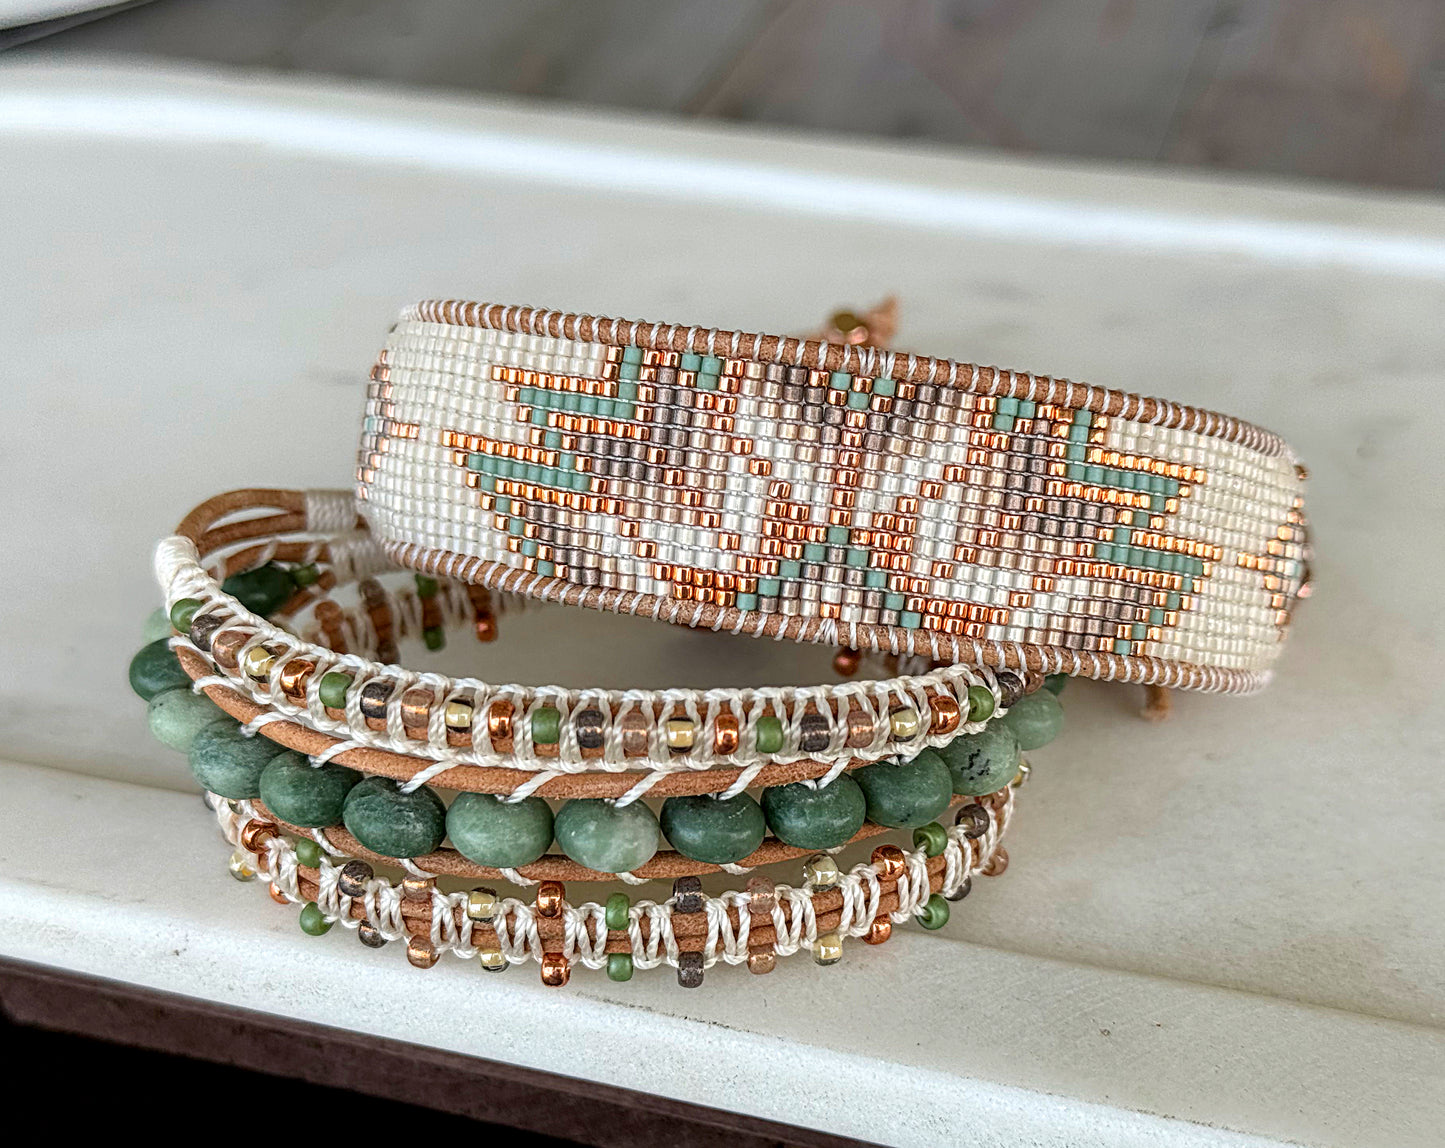 Sage, Ivory, Copper Starburst beaded loom woven bracelet trimmed with leather